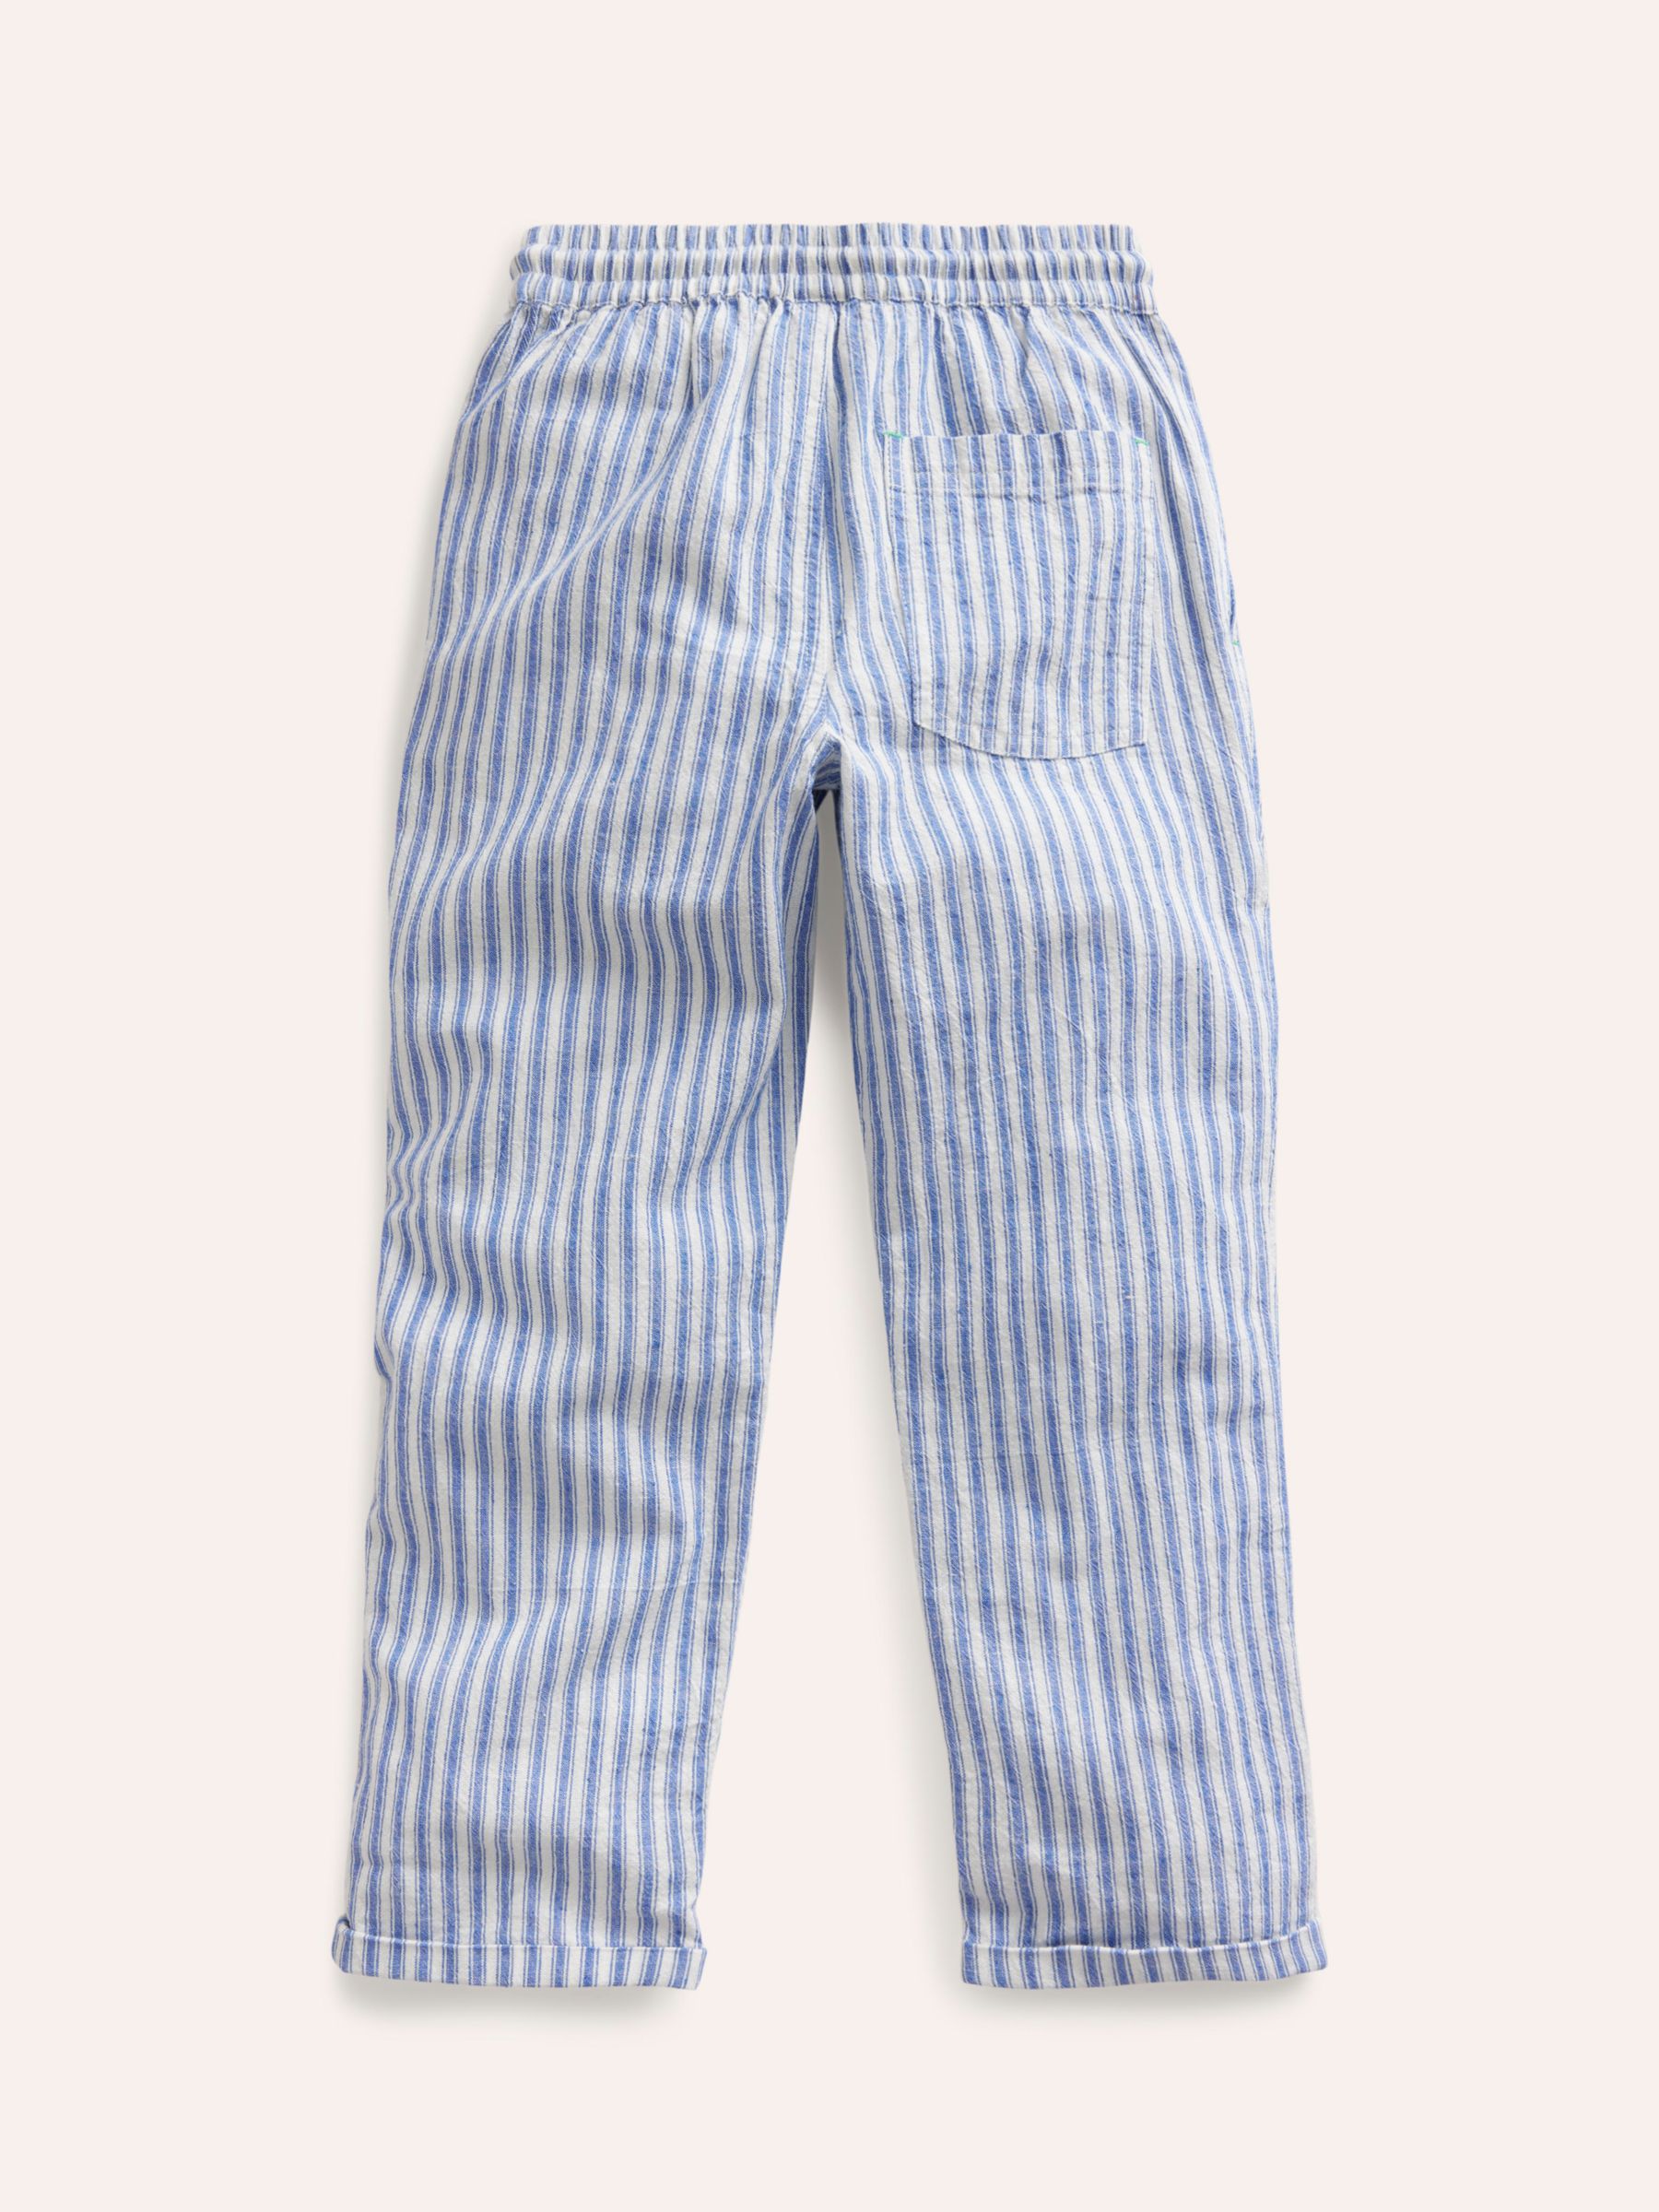 Mini Boden Kids' Summer Stripe Pull On Trousers, Bluejay Ticking, 3 years